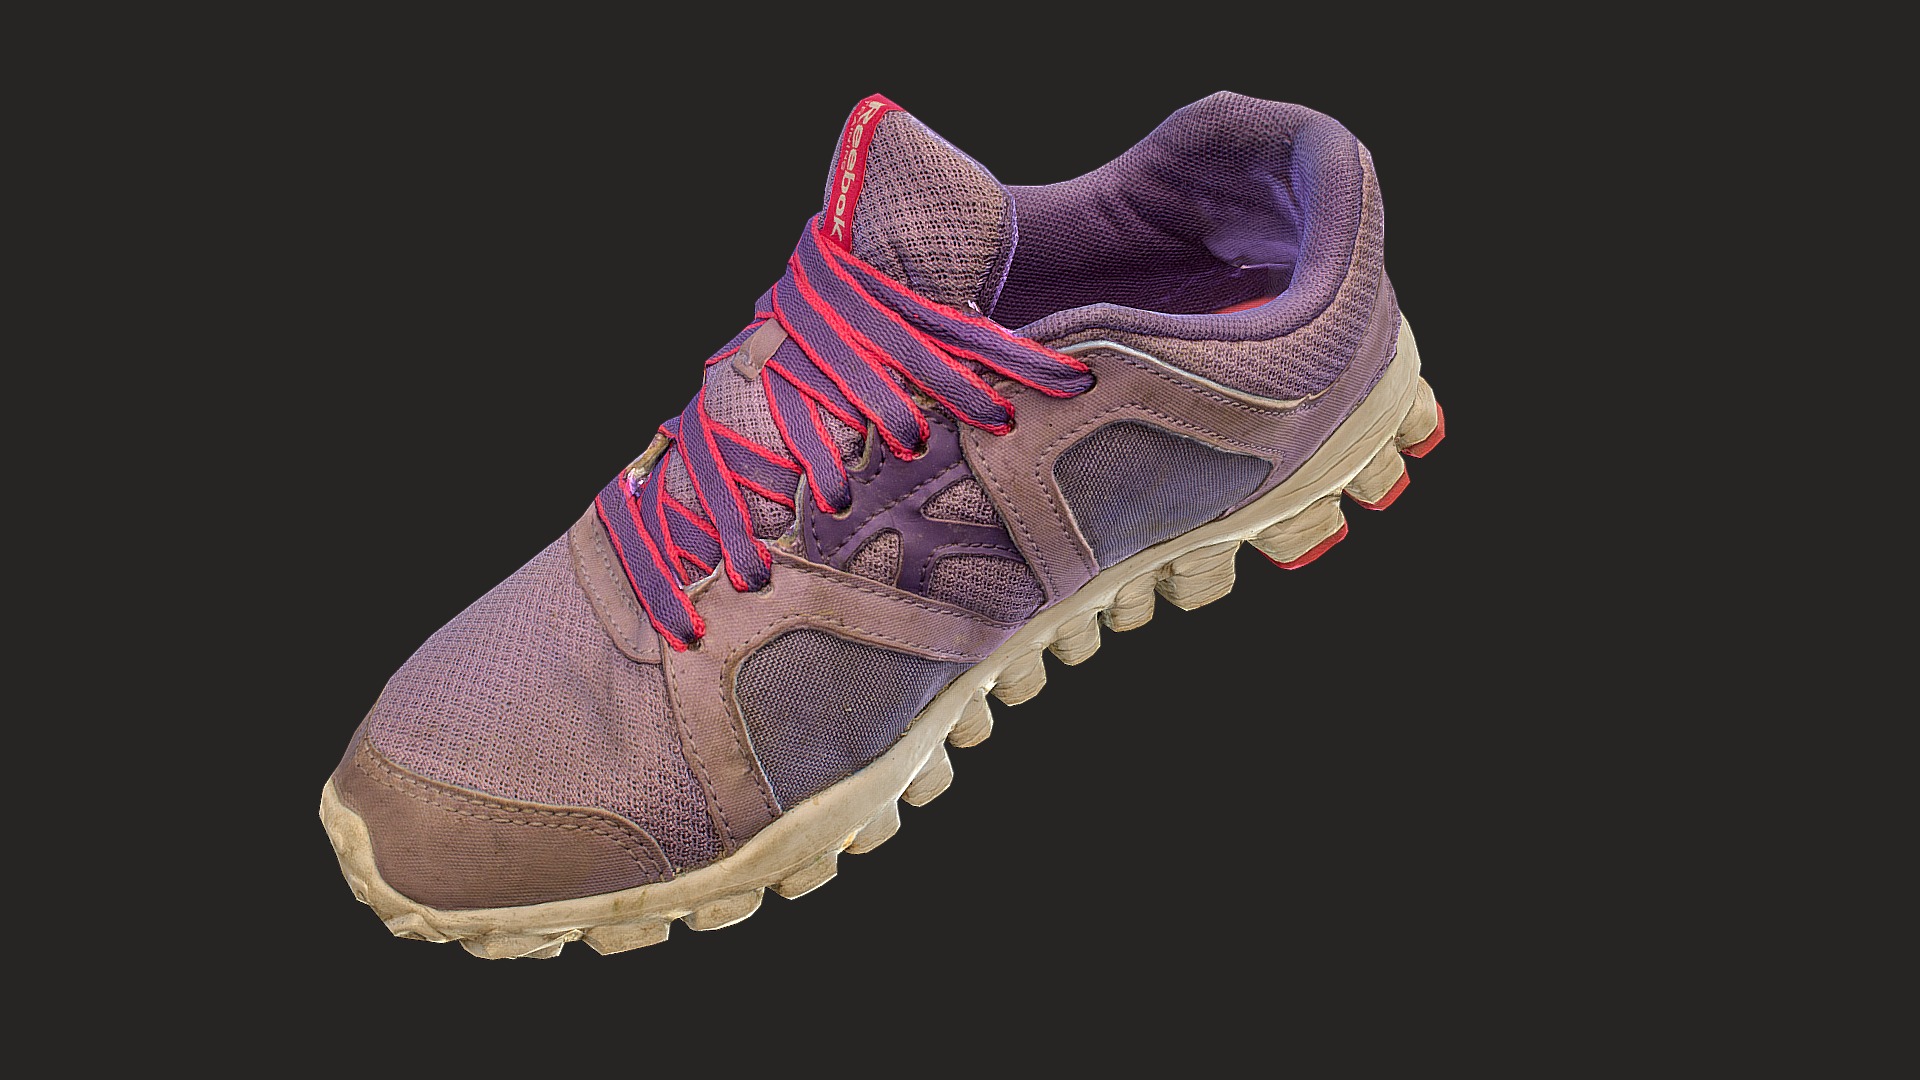 3D model Worn sneaker low poly 3D model - This is a 3D model of the Worn sneaker low poly 3D model. The 3D model is about a close-up of a shoe.